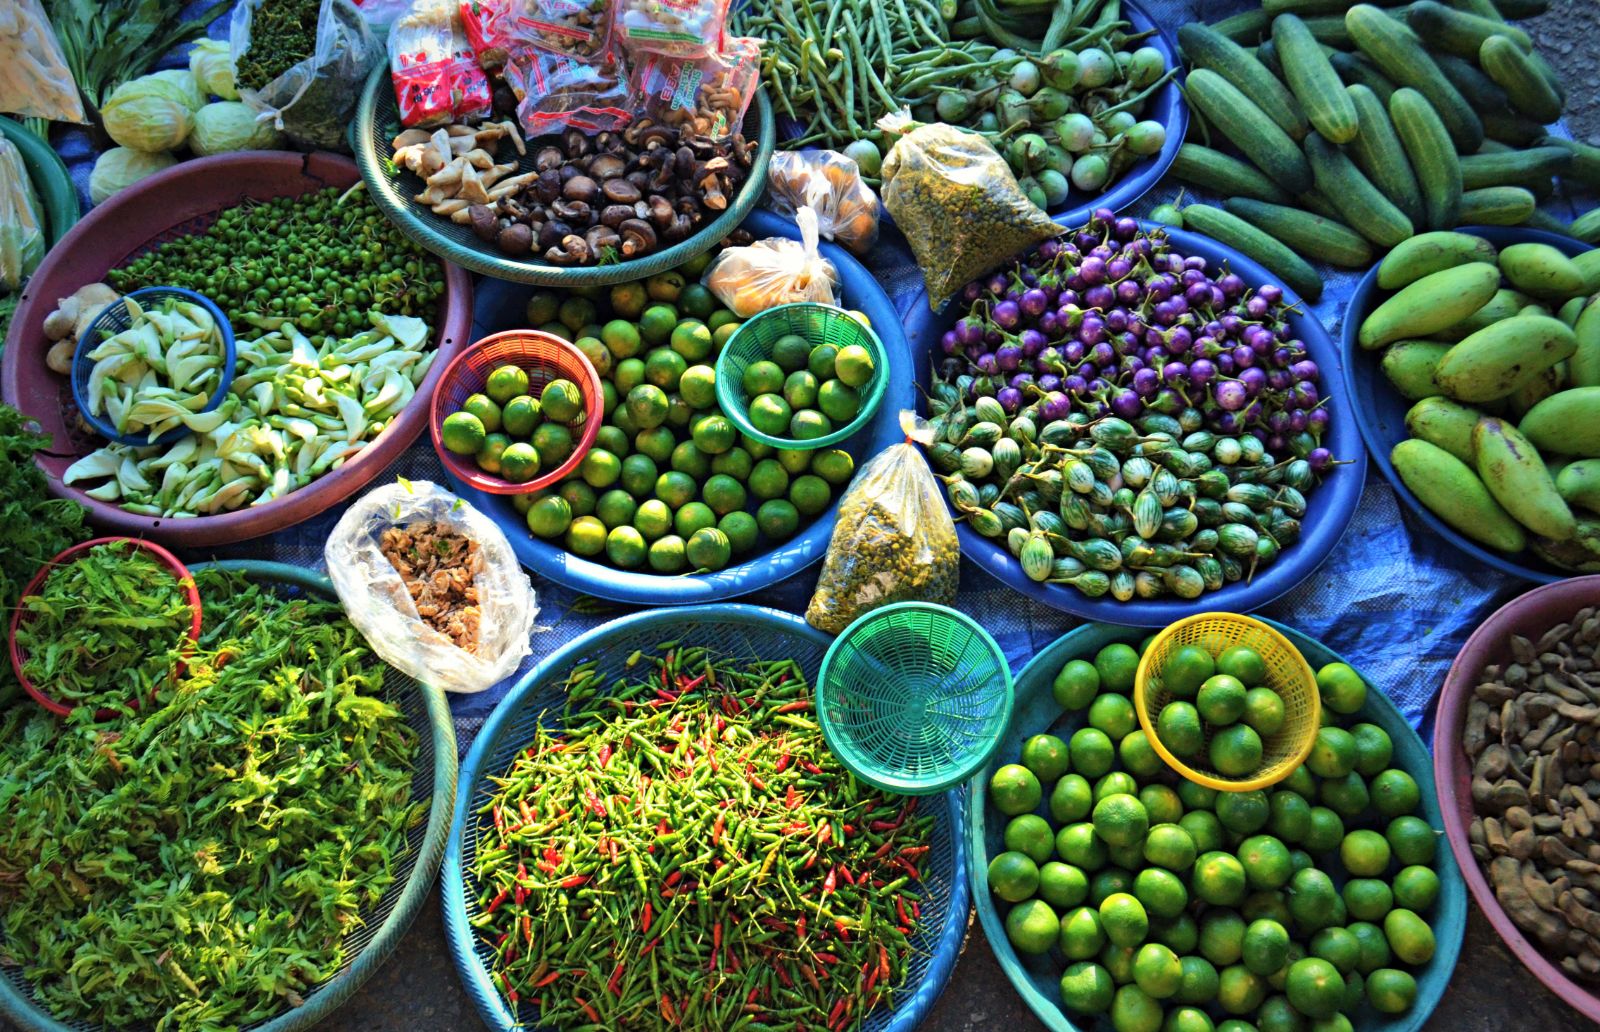 A vegetable market in Thailand